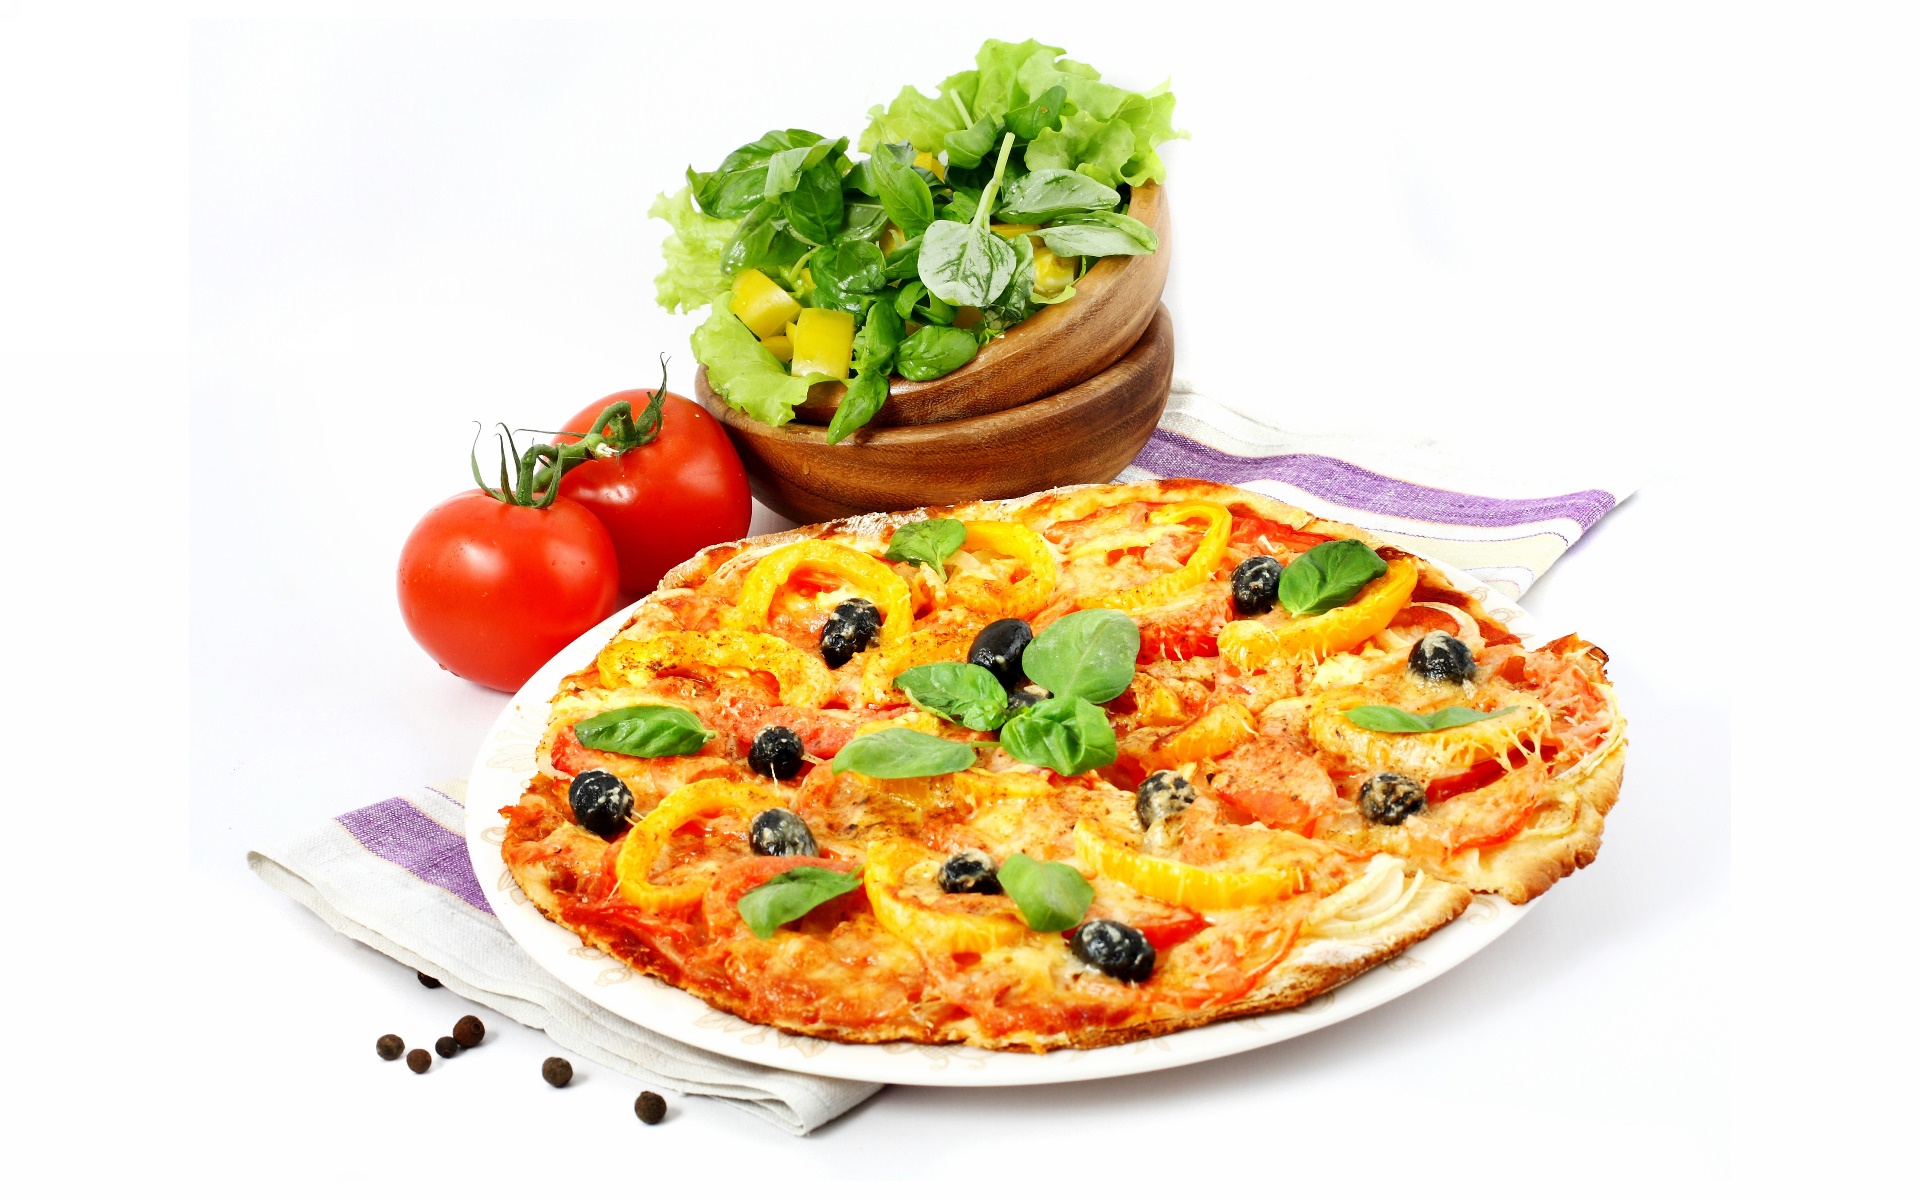 General 1920x1200 food pizza simple background tomatoes olives basil